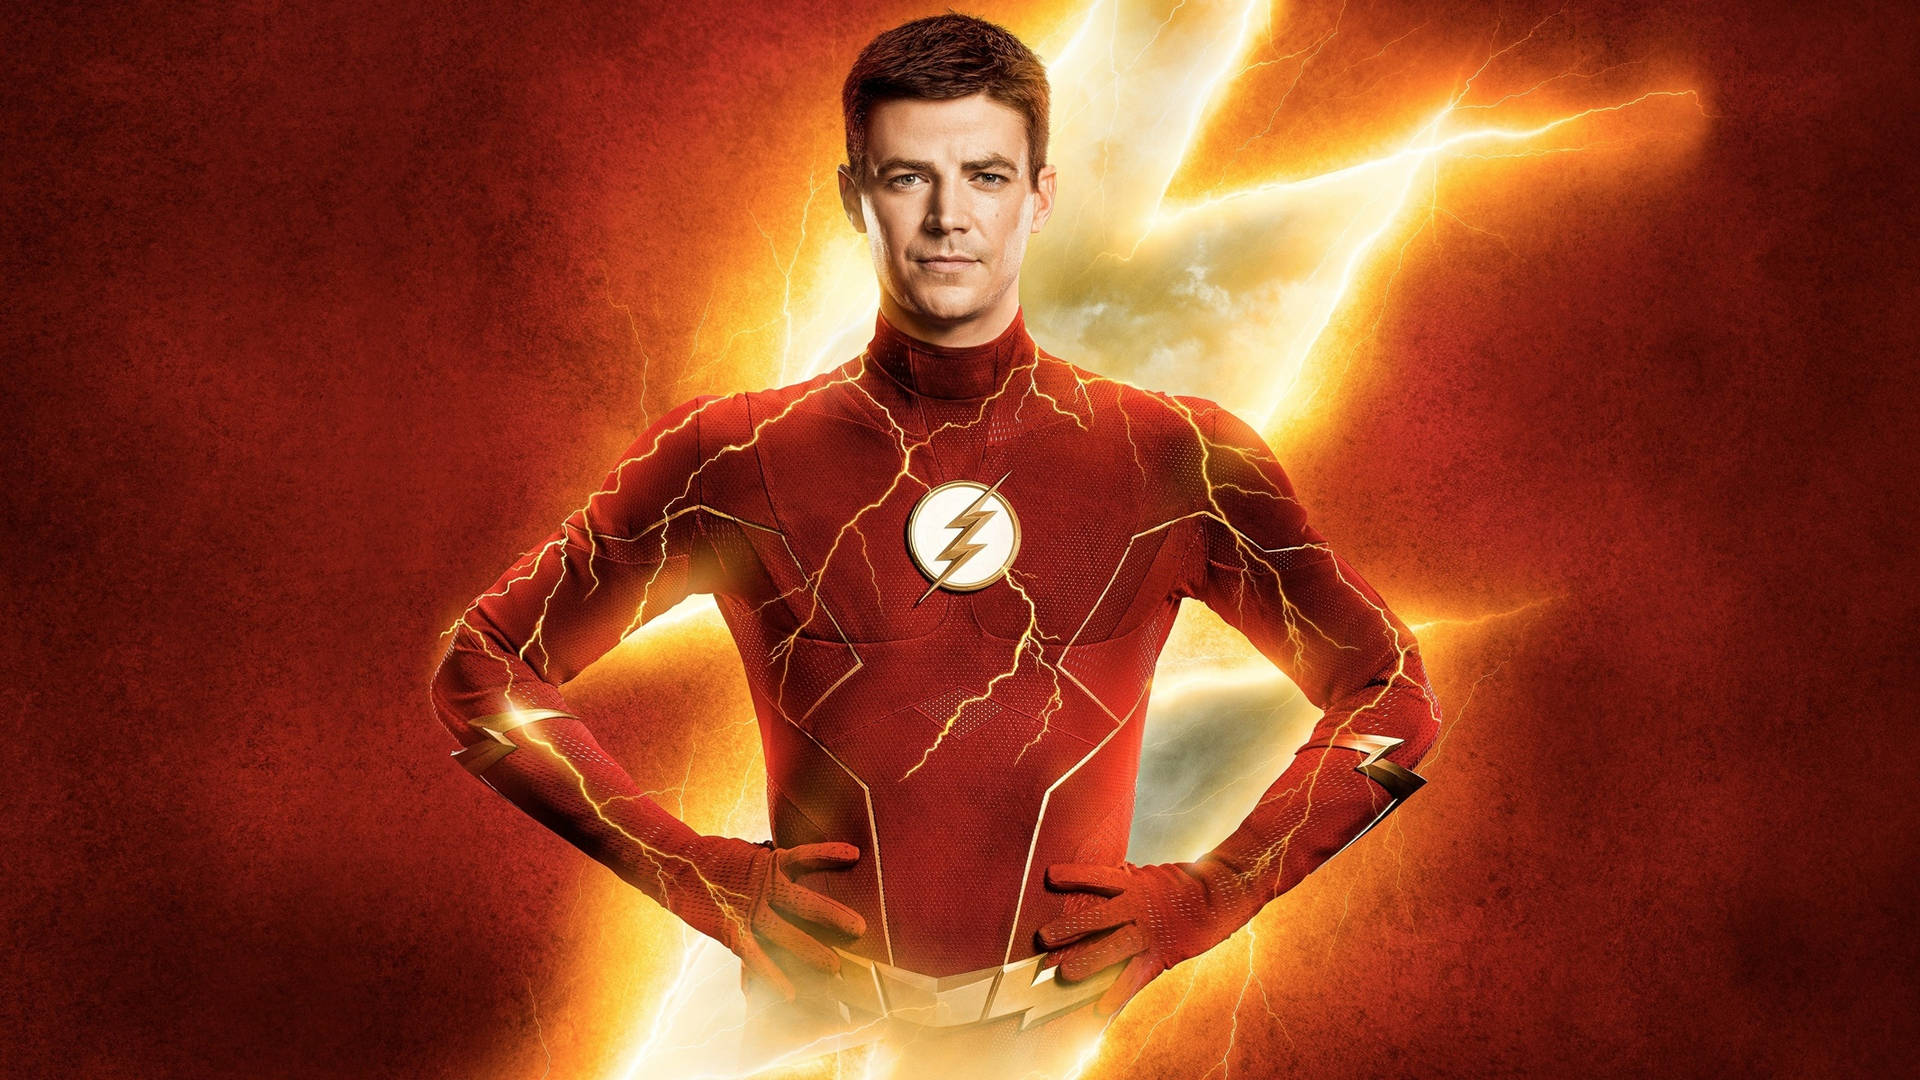 The Flash Movie Grant Gustin Television Poster Wallpaper